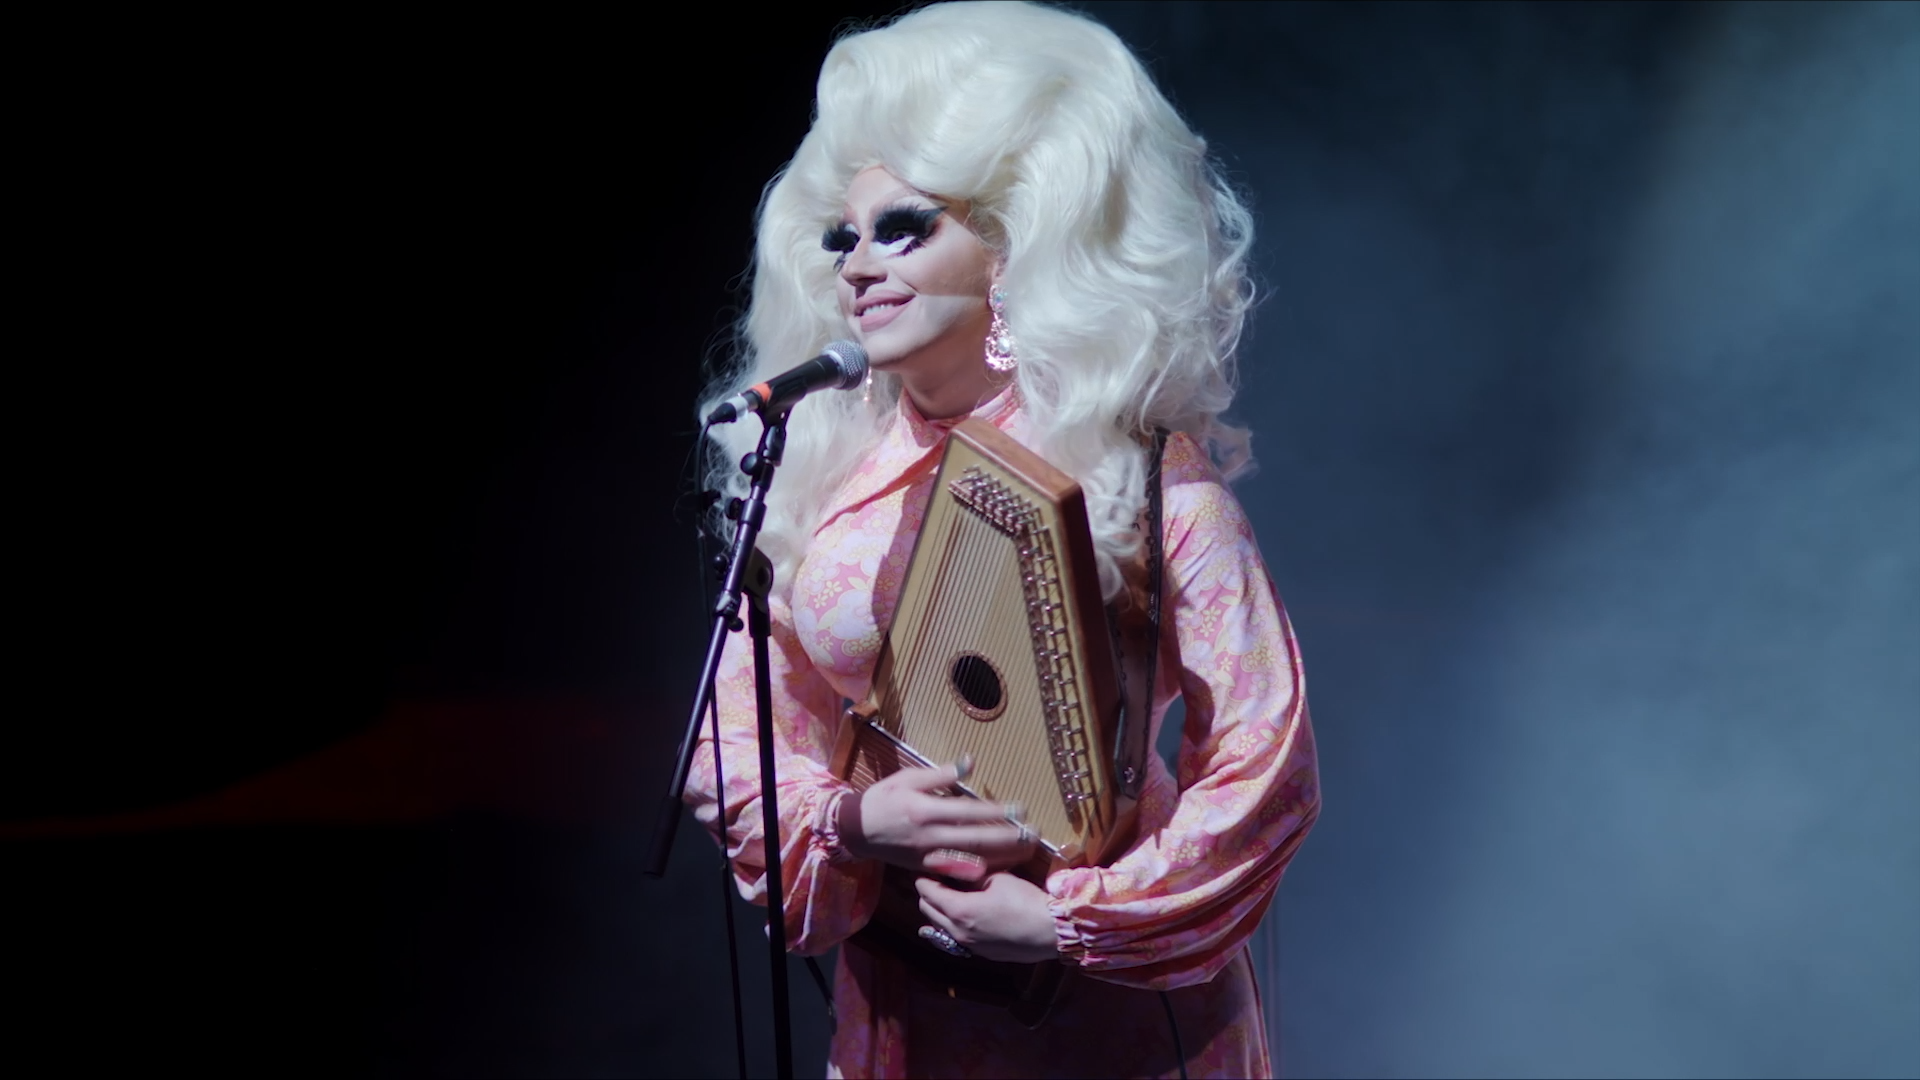 Trixie sings into a microphone and plays an autoharp. She wears a huge platinum blonde wig and a pink floral dress.